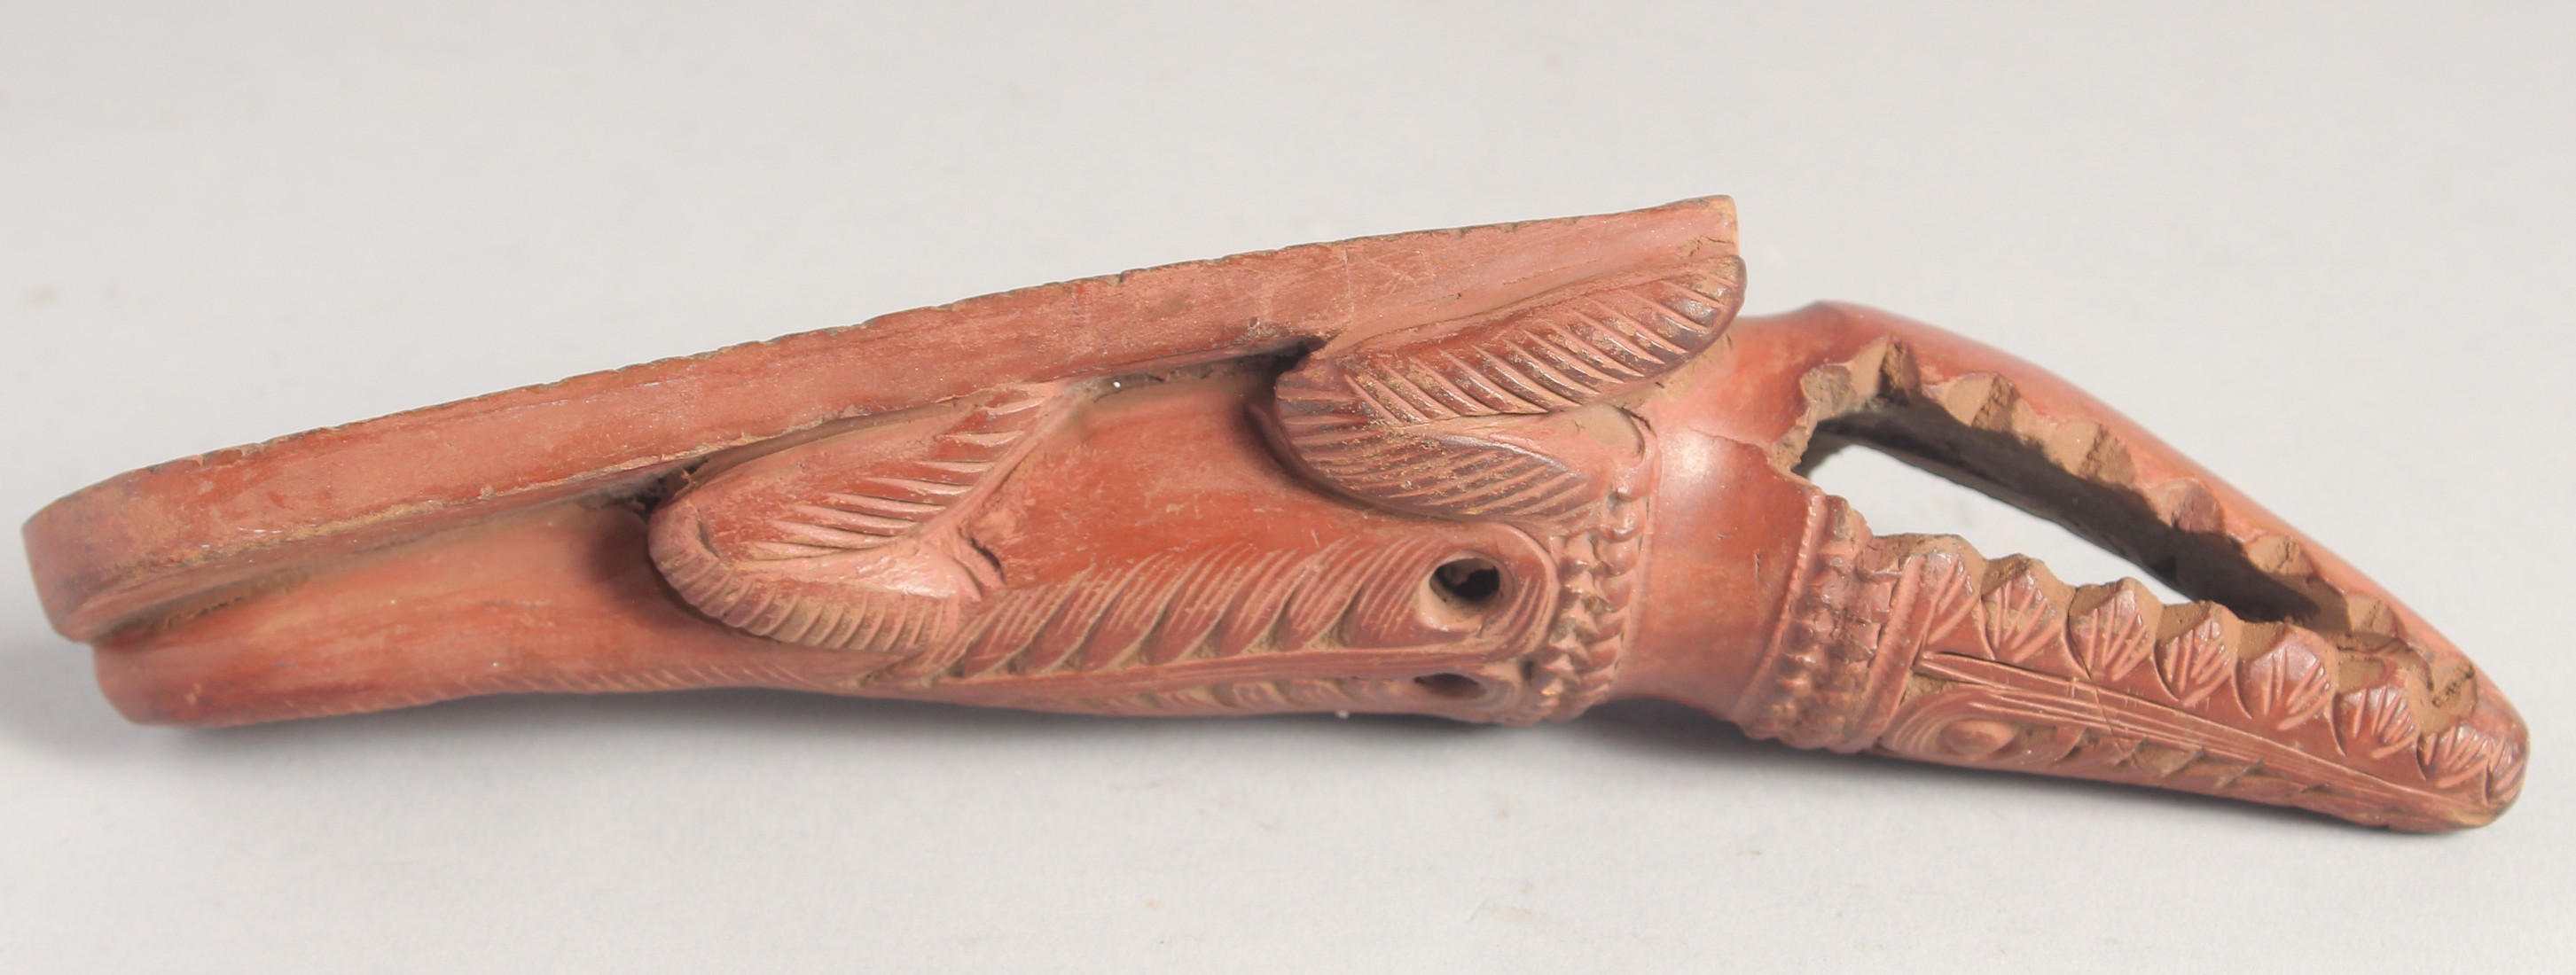 TWO 19TH CENTURY OTTOMAN EGYPTIAN TOPHANE CLAY CROCODILE FOOT SCRUBBERS. 22cm and 19cm - Image 4 of 8